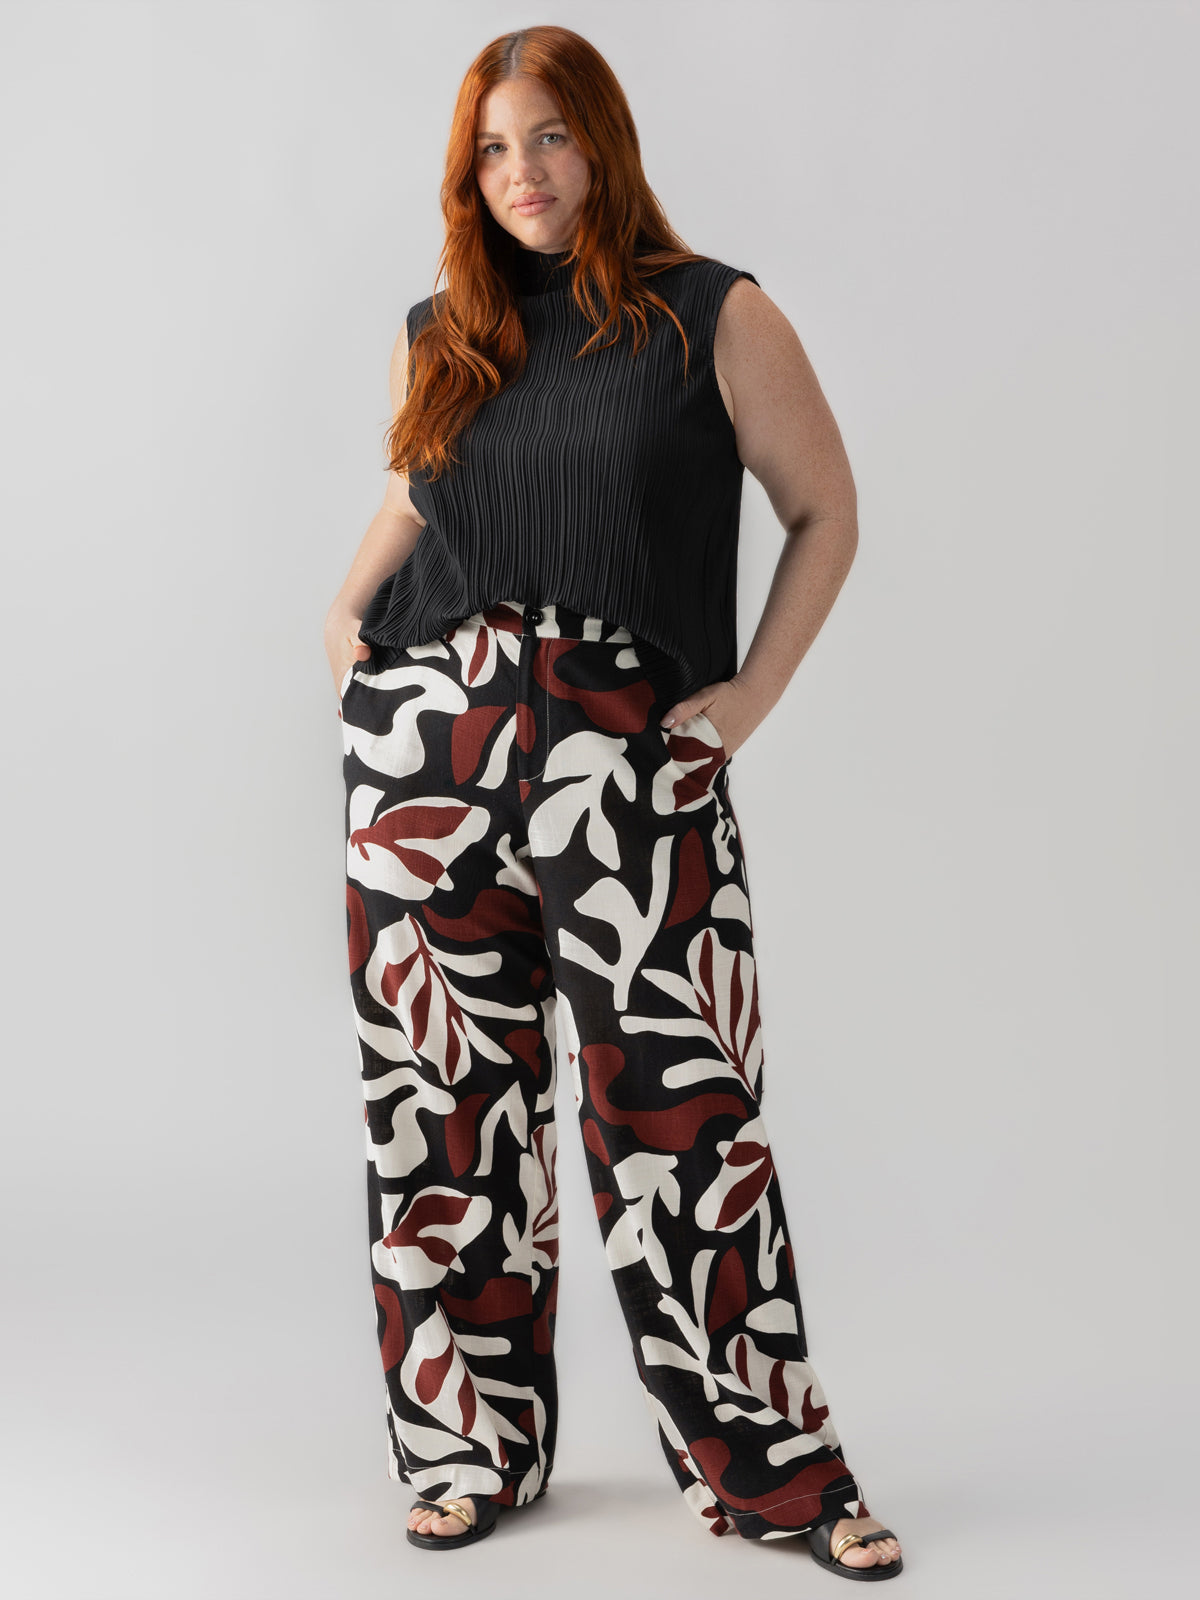 The Soft Semi-High Rise Trouser Mineral Inclusive Collection